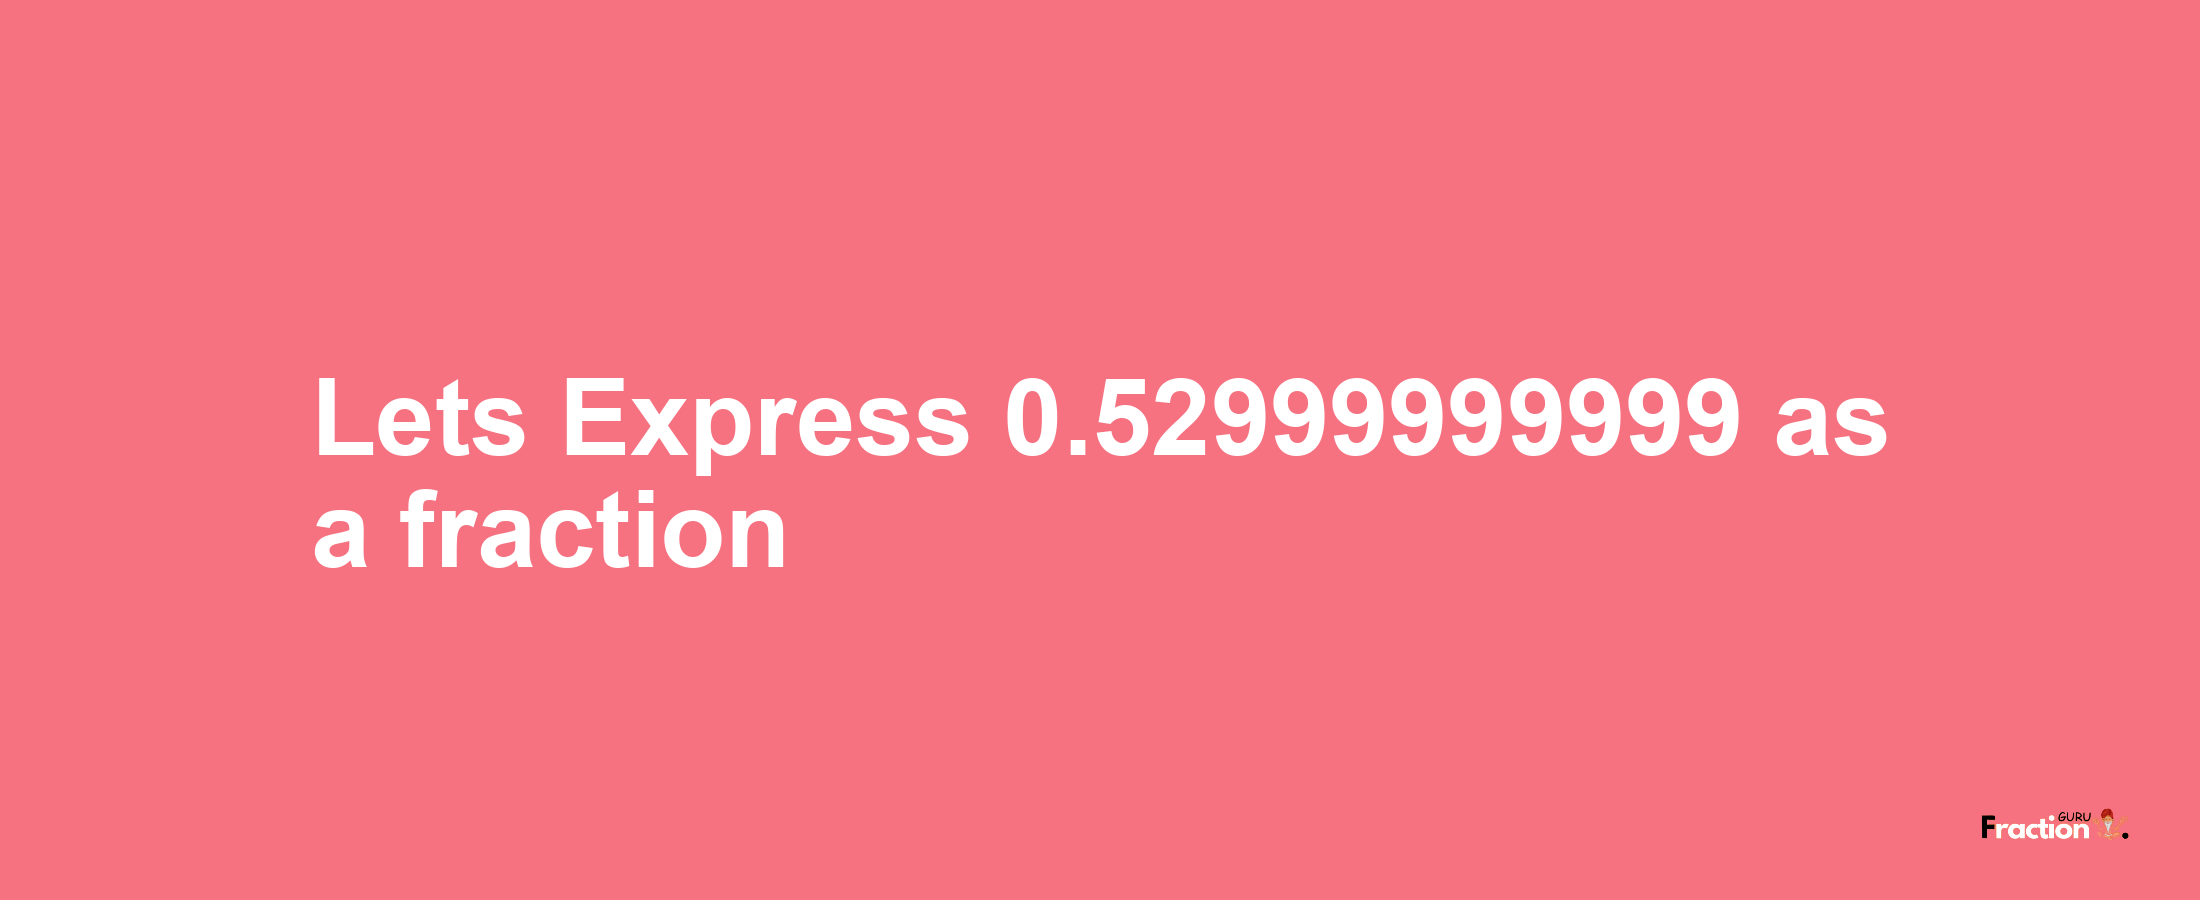 Lets Express 0.52999999999 as afraction